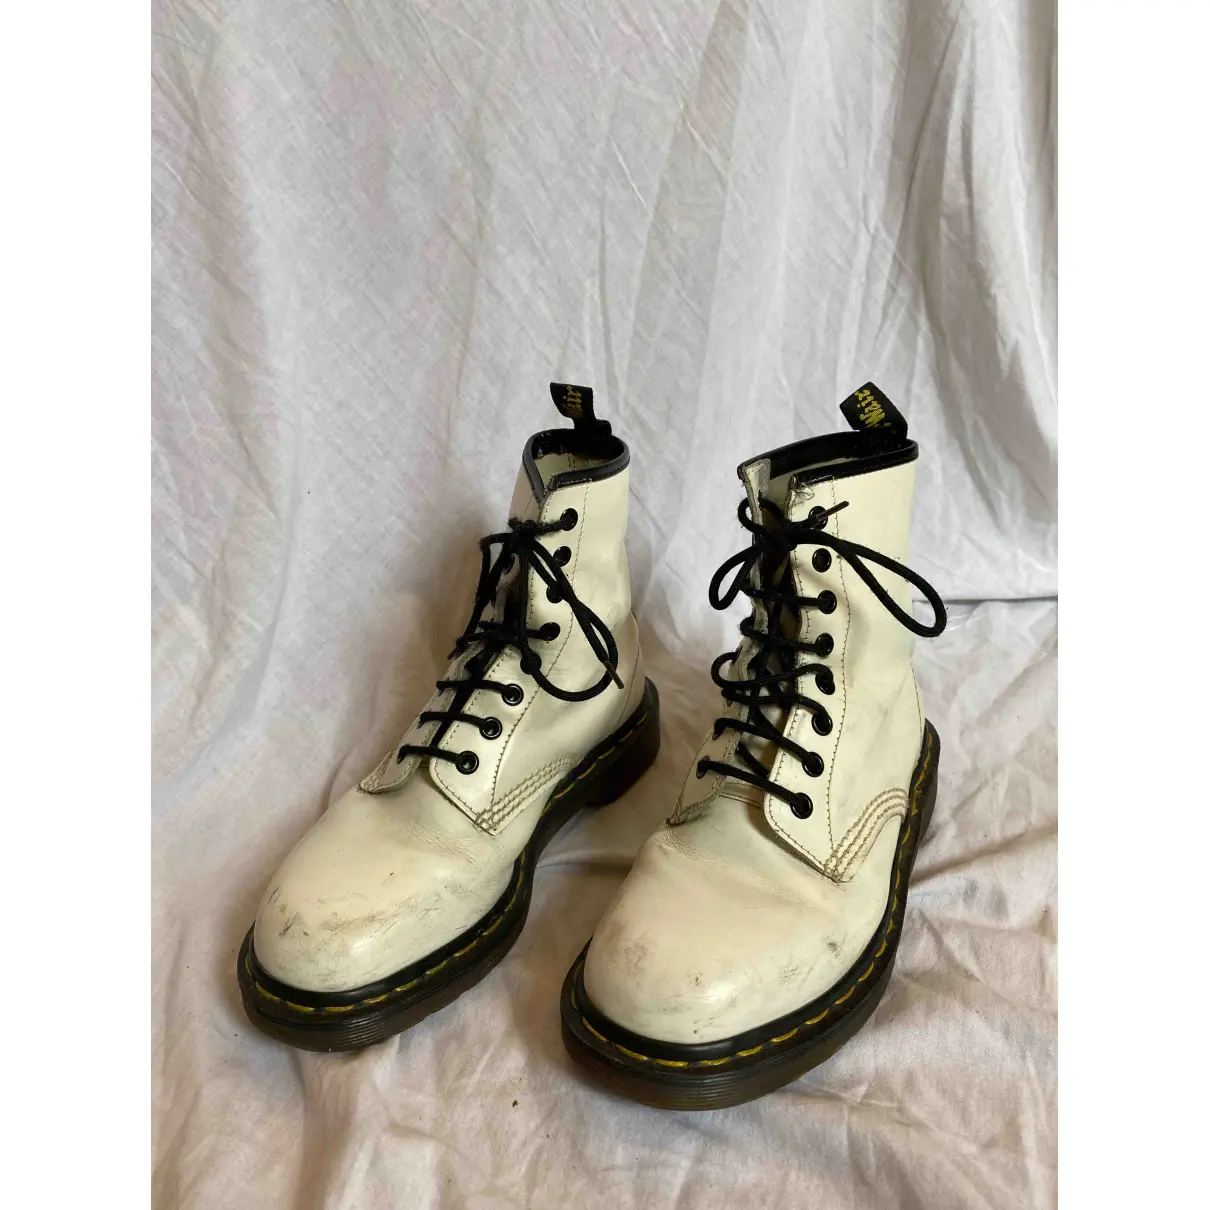 Buy Dr. Martens Leather lace up boots online